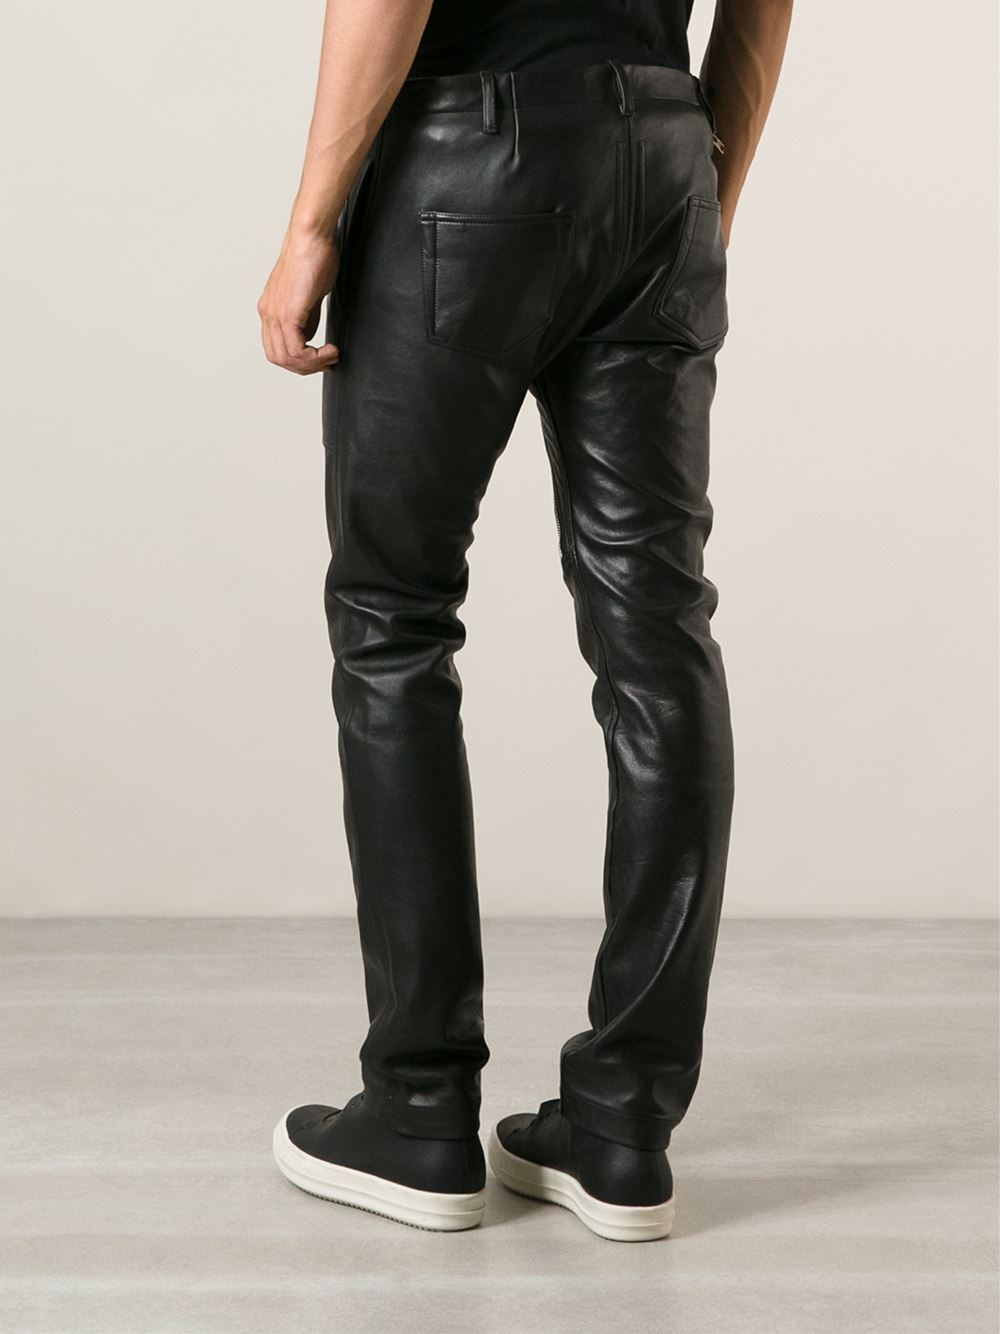 Rick Owens Slim Fit Leather Trousers In Black For Men Lyst 9029